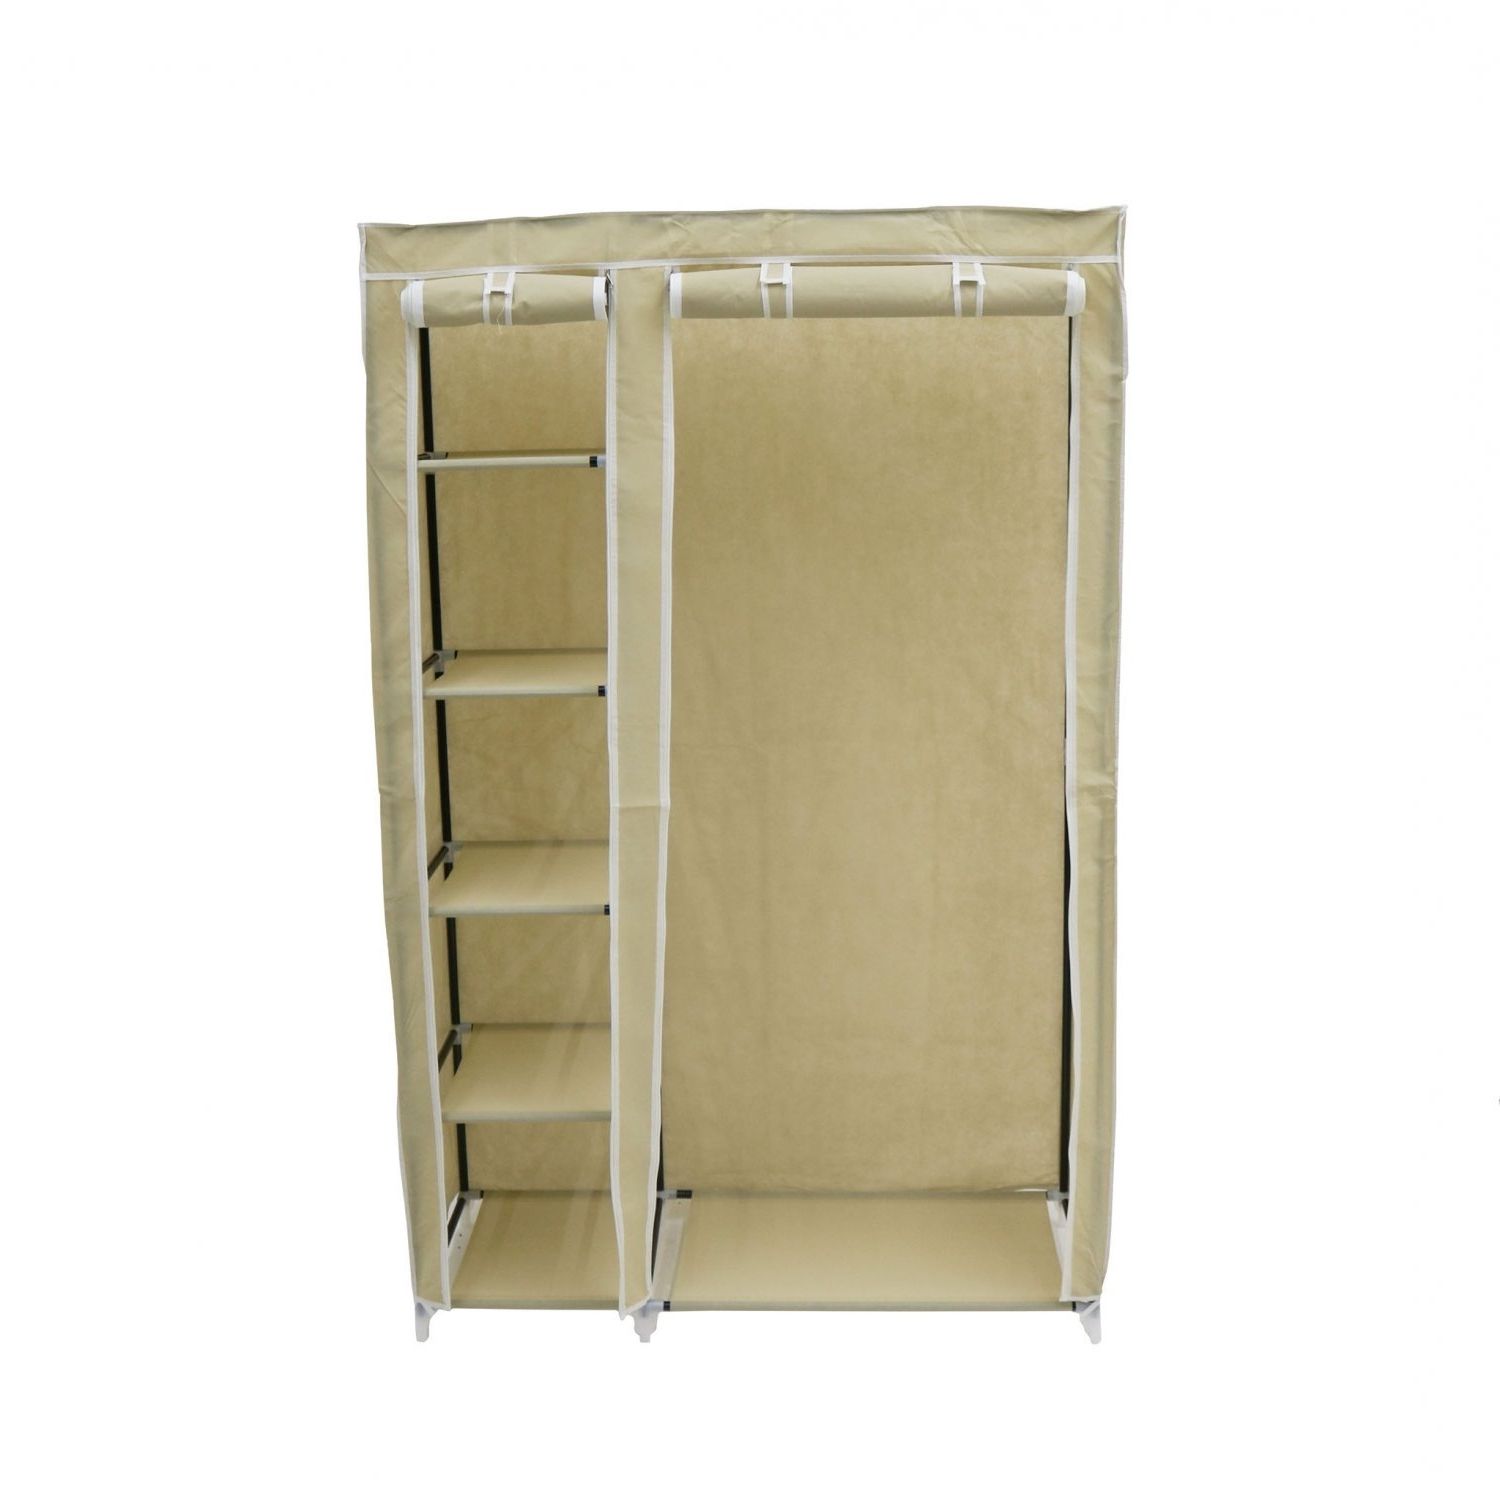 Double Cream Canvas Wardrobe Clothes Rail Hanging Storage Closet In Best And Newest Double Clothes Rail Wardrobes (View 5 of 15)